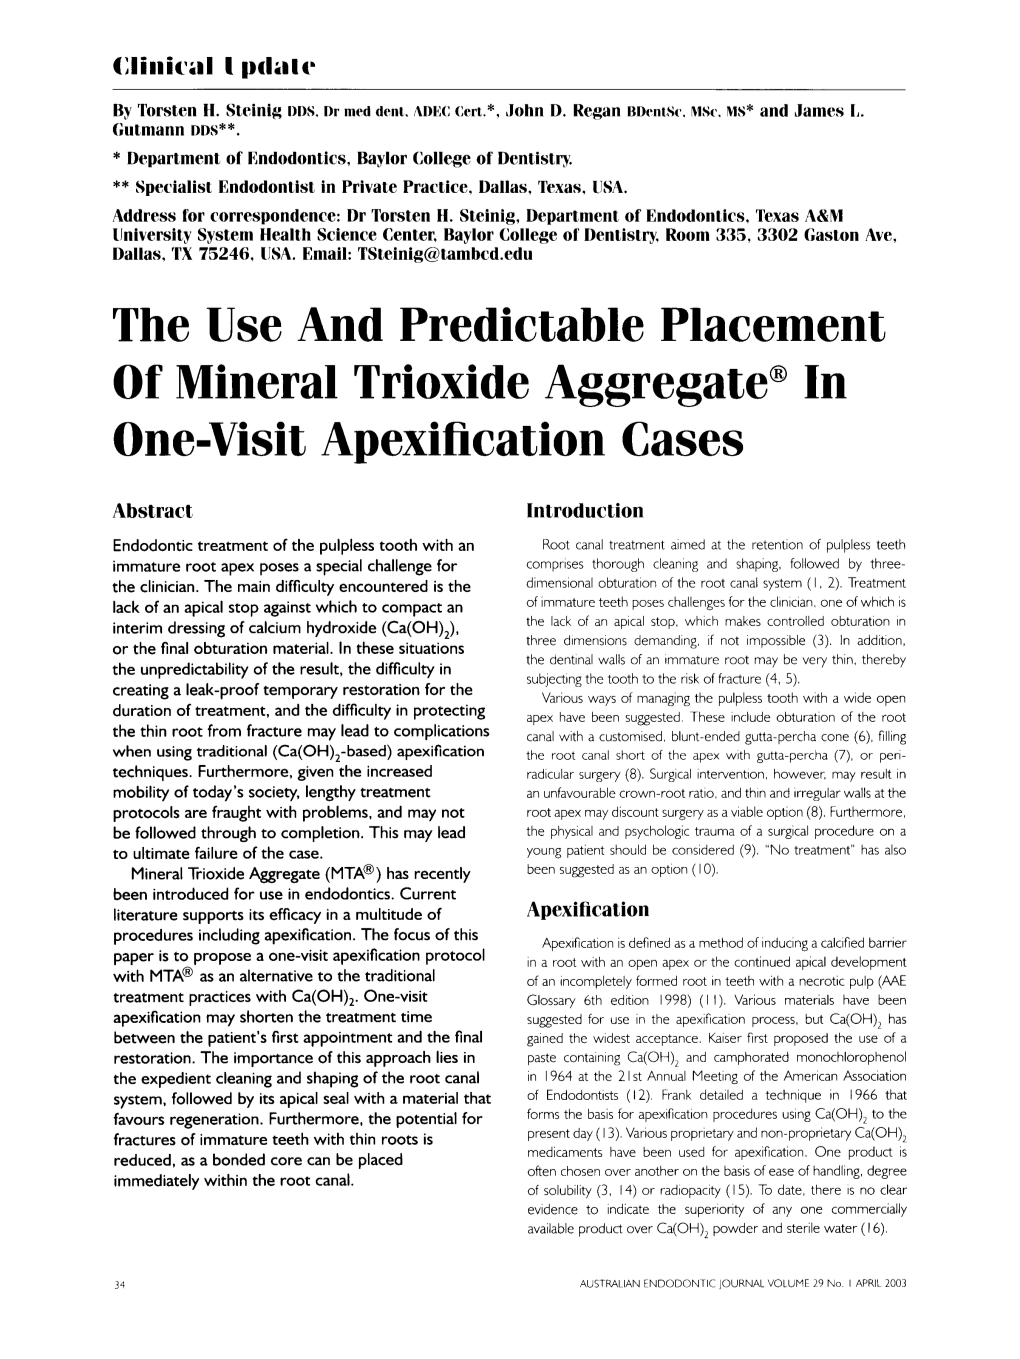 The Use and Predictable Placement of Mineral Trioxide Aggregate® In